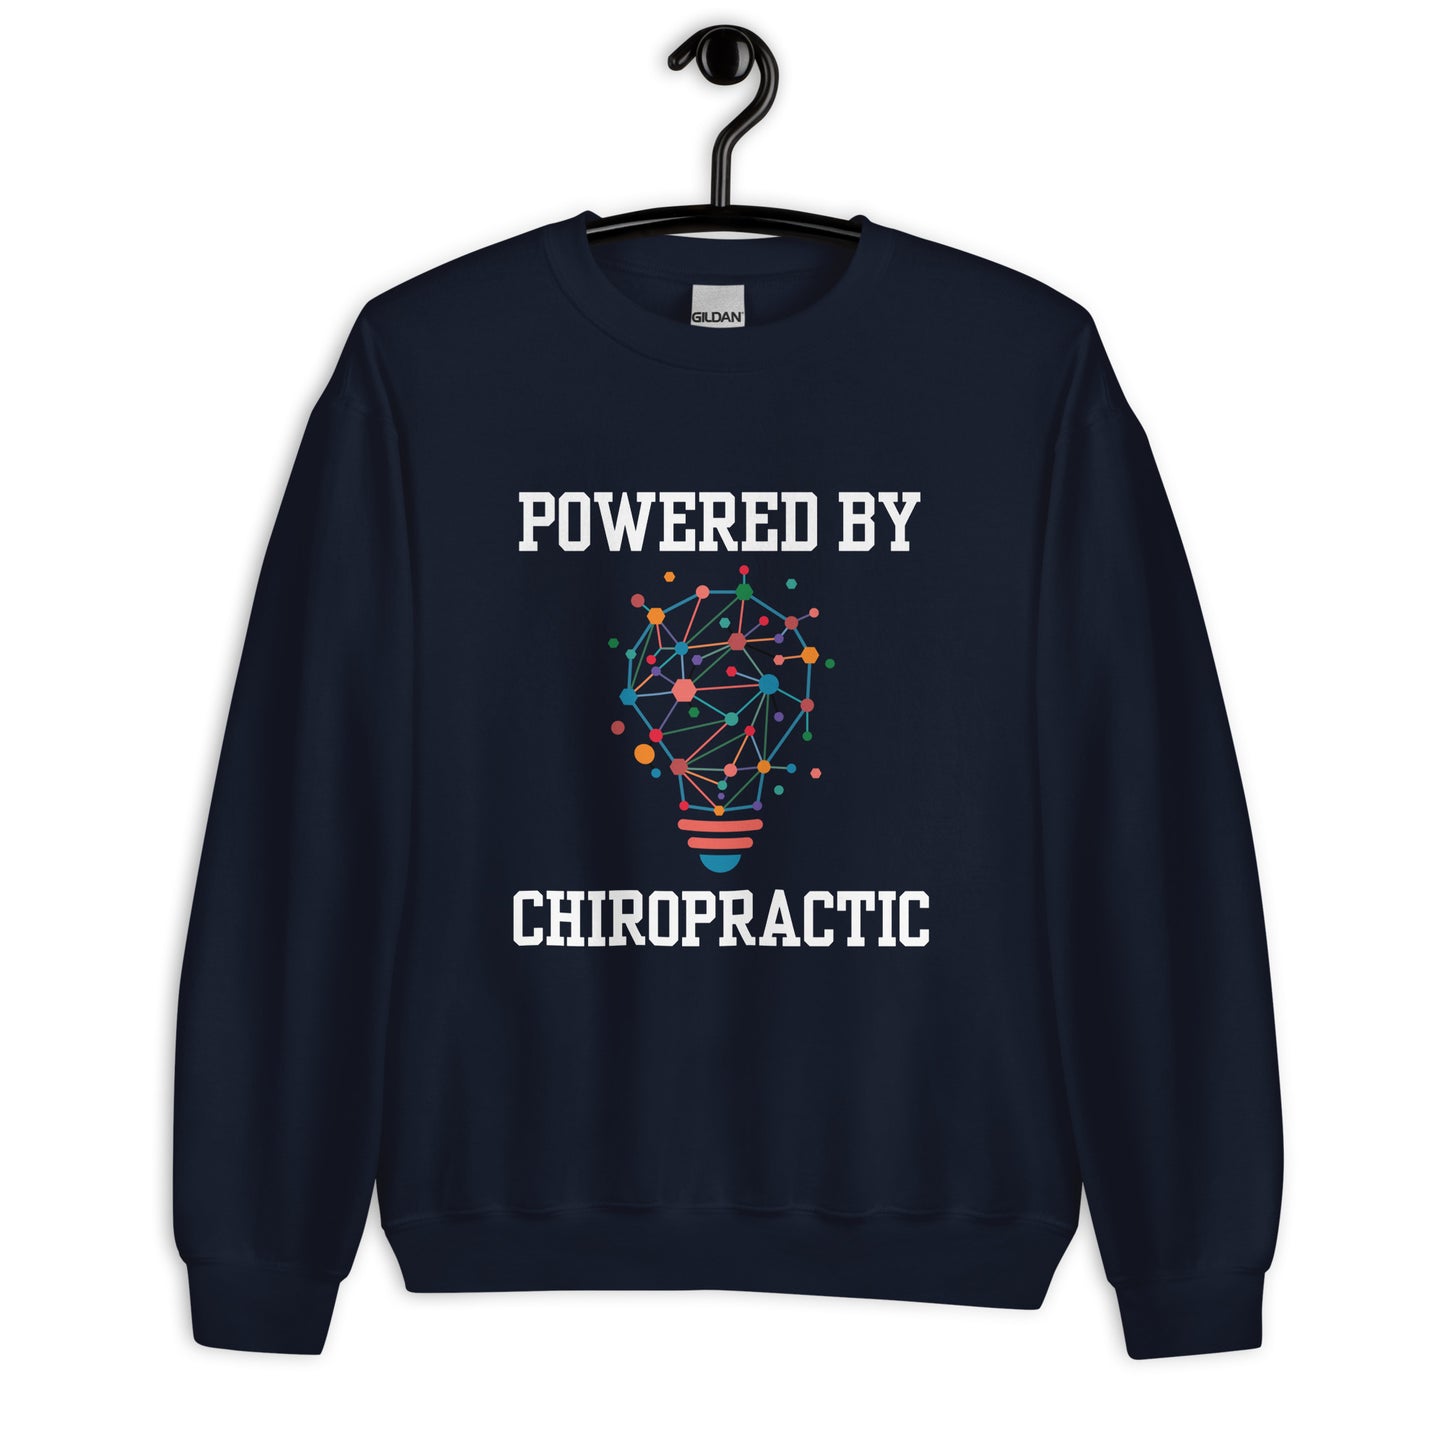 Powered by Chiropractic